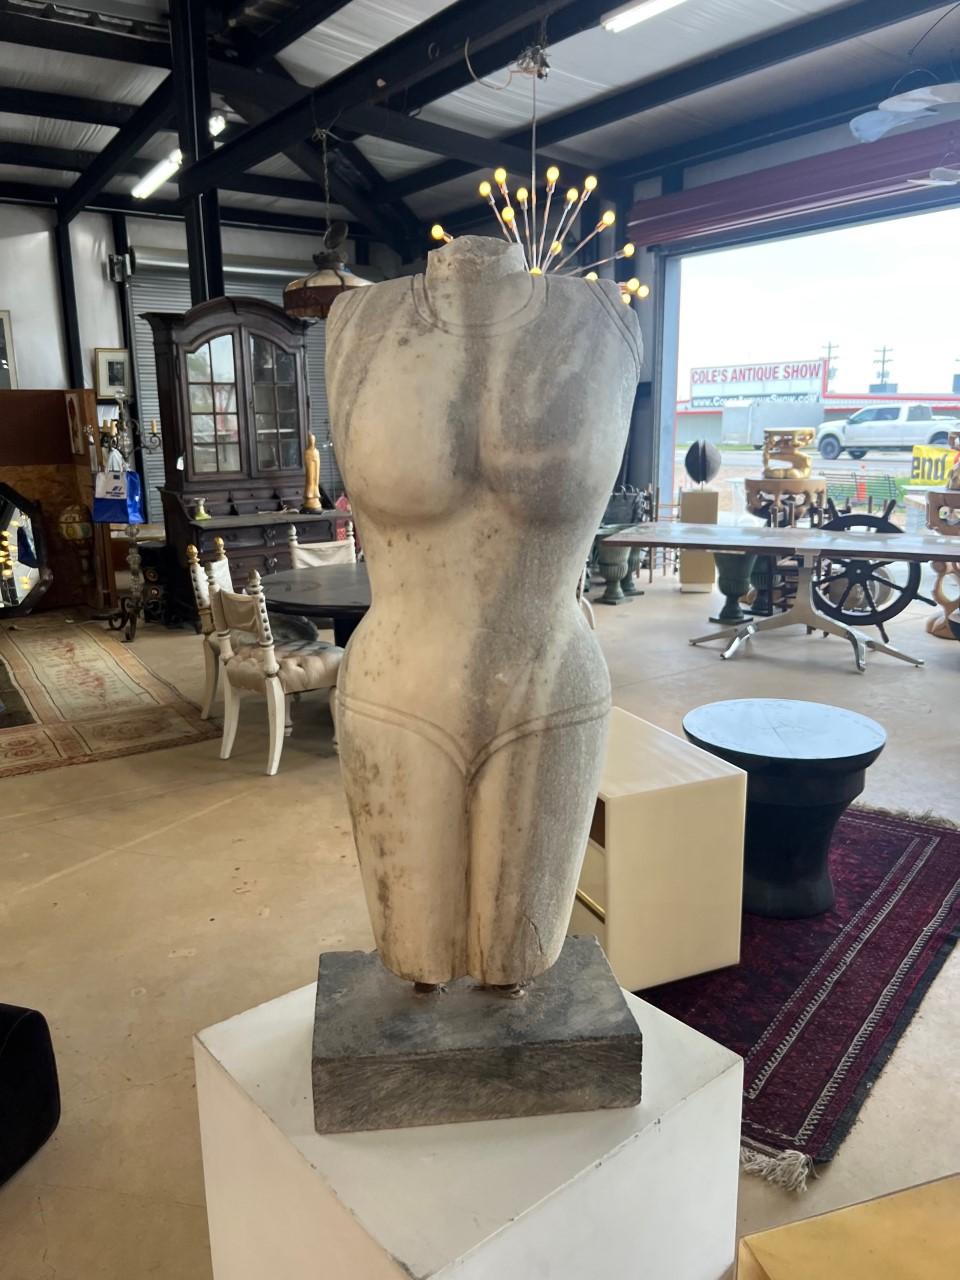 Stone Statue of Female Torso:

If you’re looking for a stone statue for the garden, this female torso sculpture is the perfect choice. It’ll also look great inside in a contemporary or traditional setting. The beauty of this stone statue is